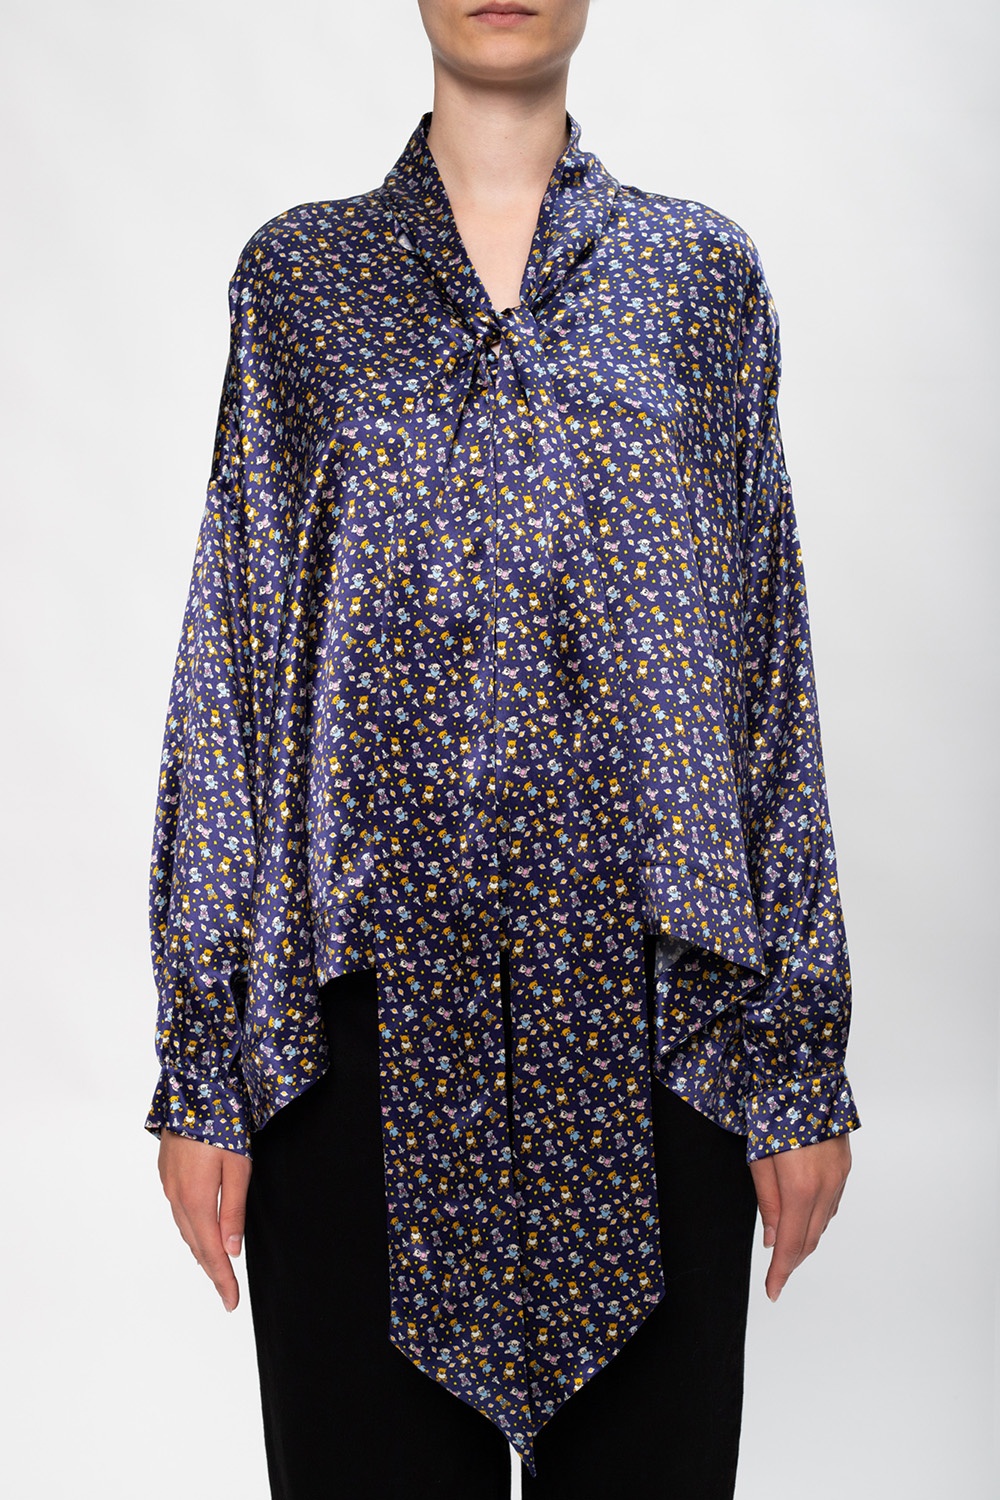 Balenciaga Patterned top with tie neck | Women's Clothing | IetpShops